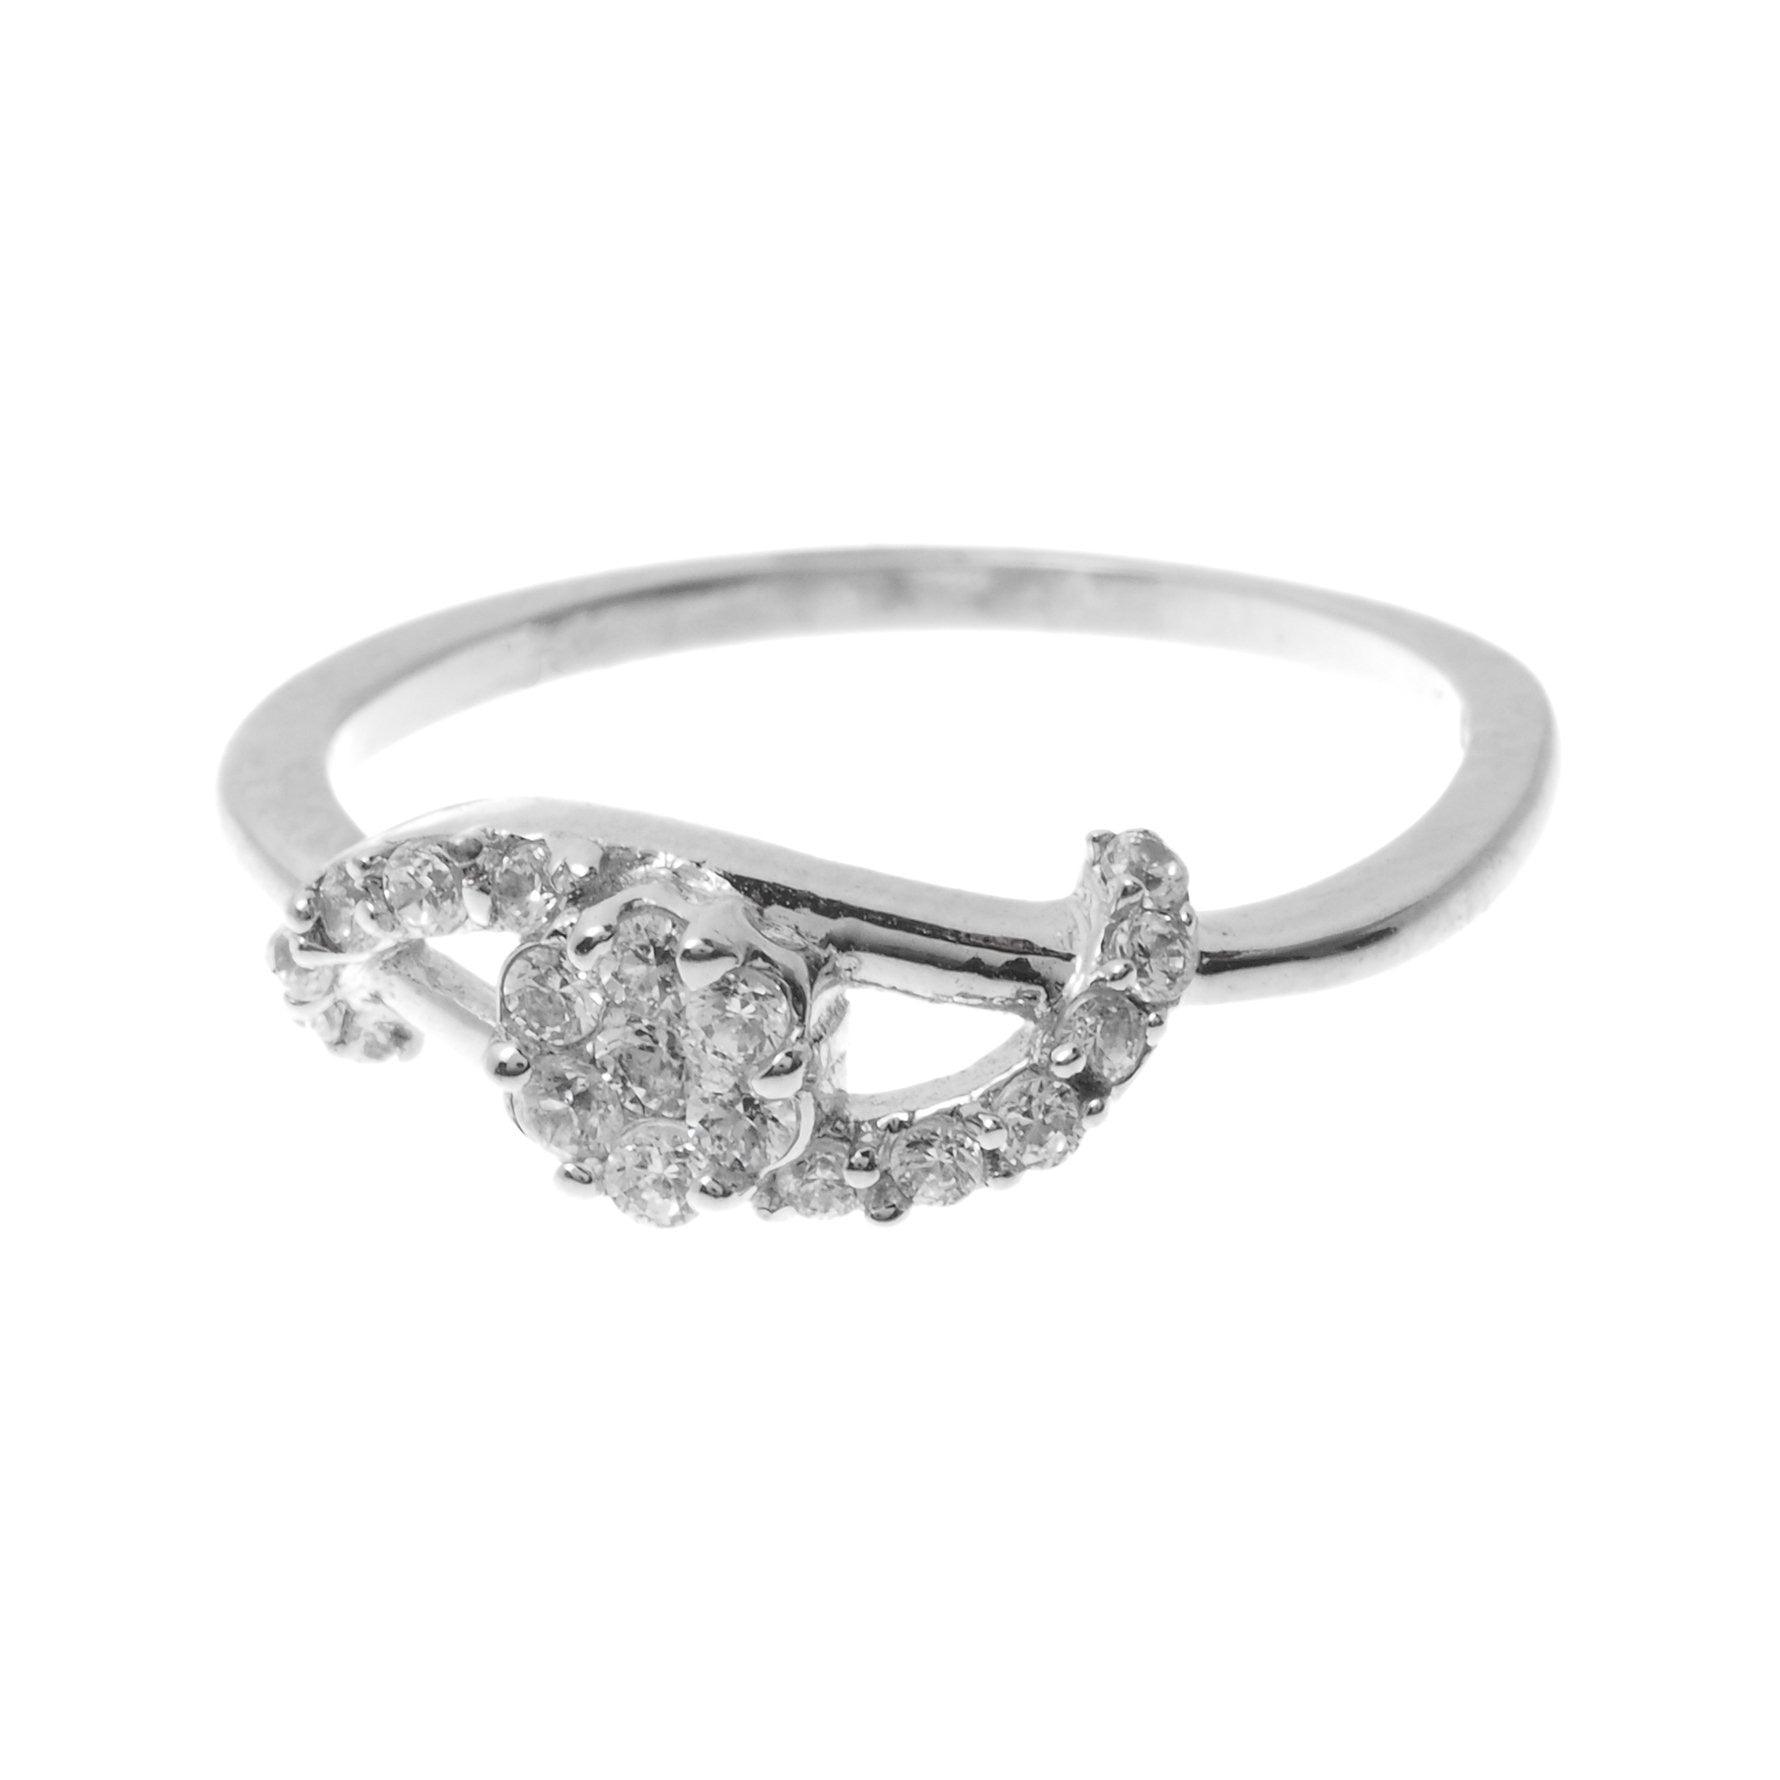 18ct White Gold Cubic Zirconia Engagement Ring LR1496